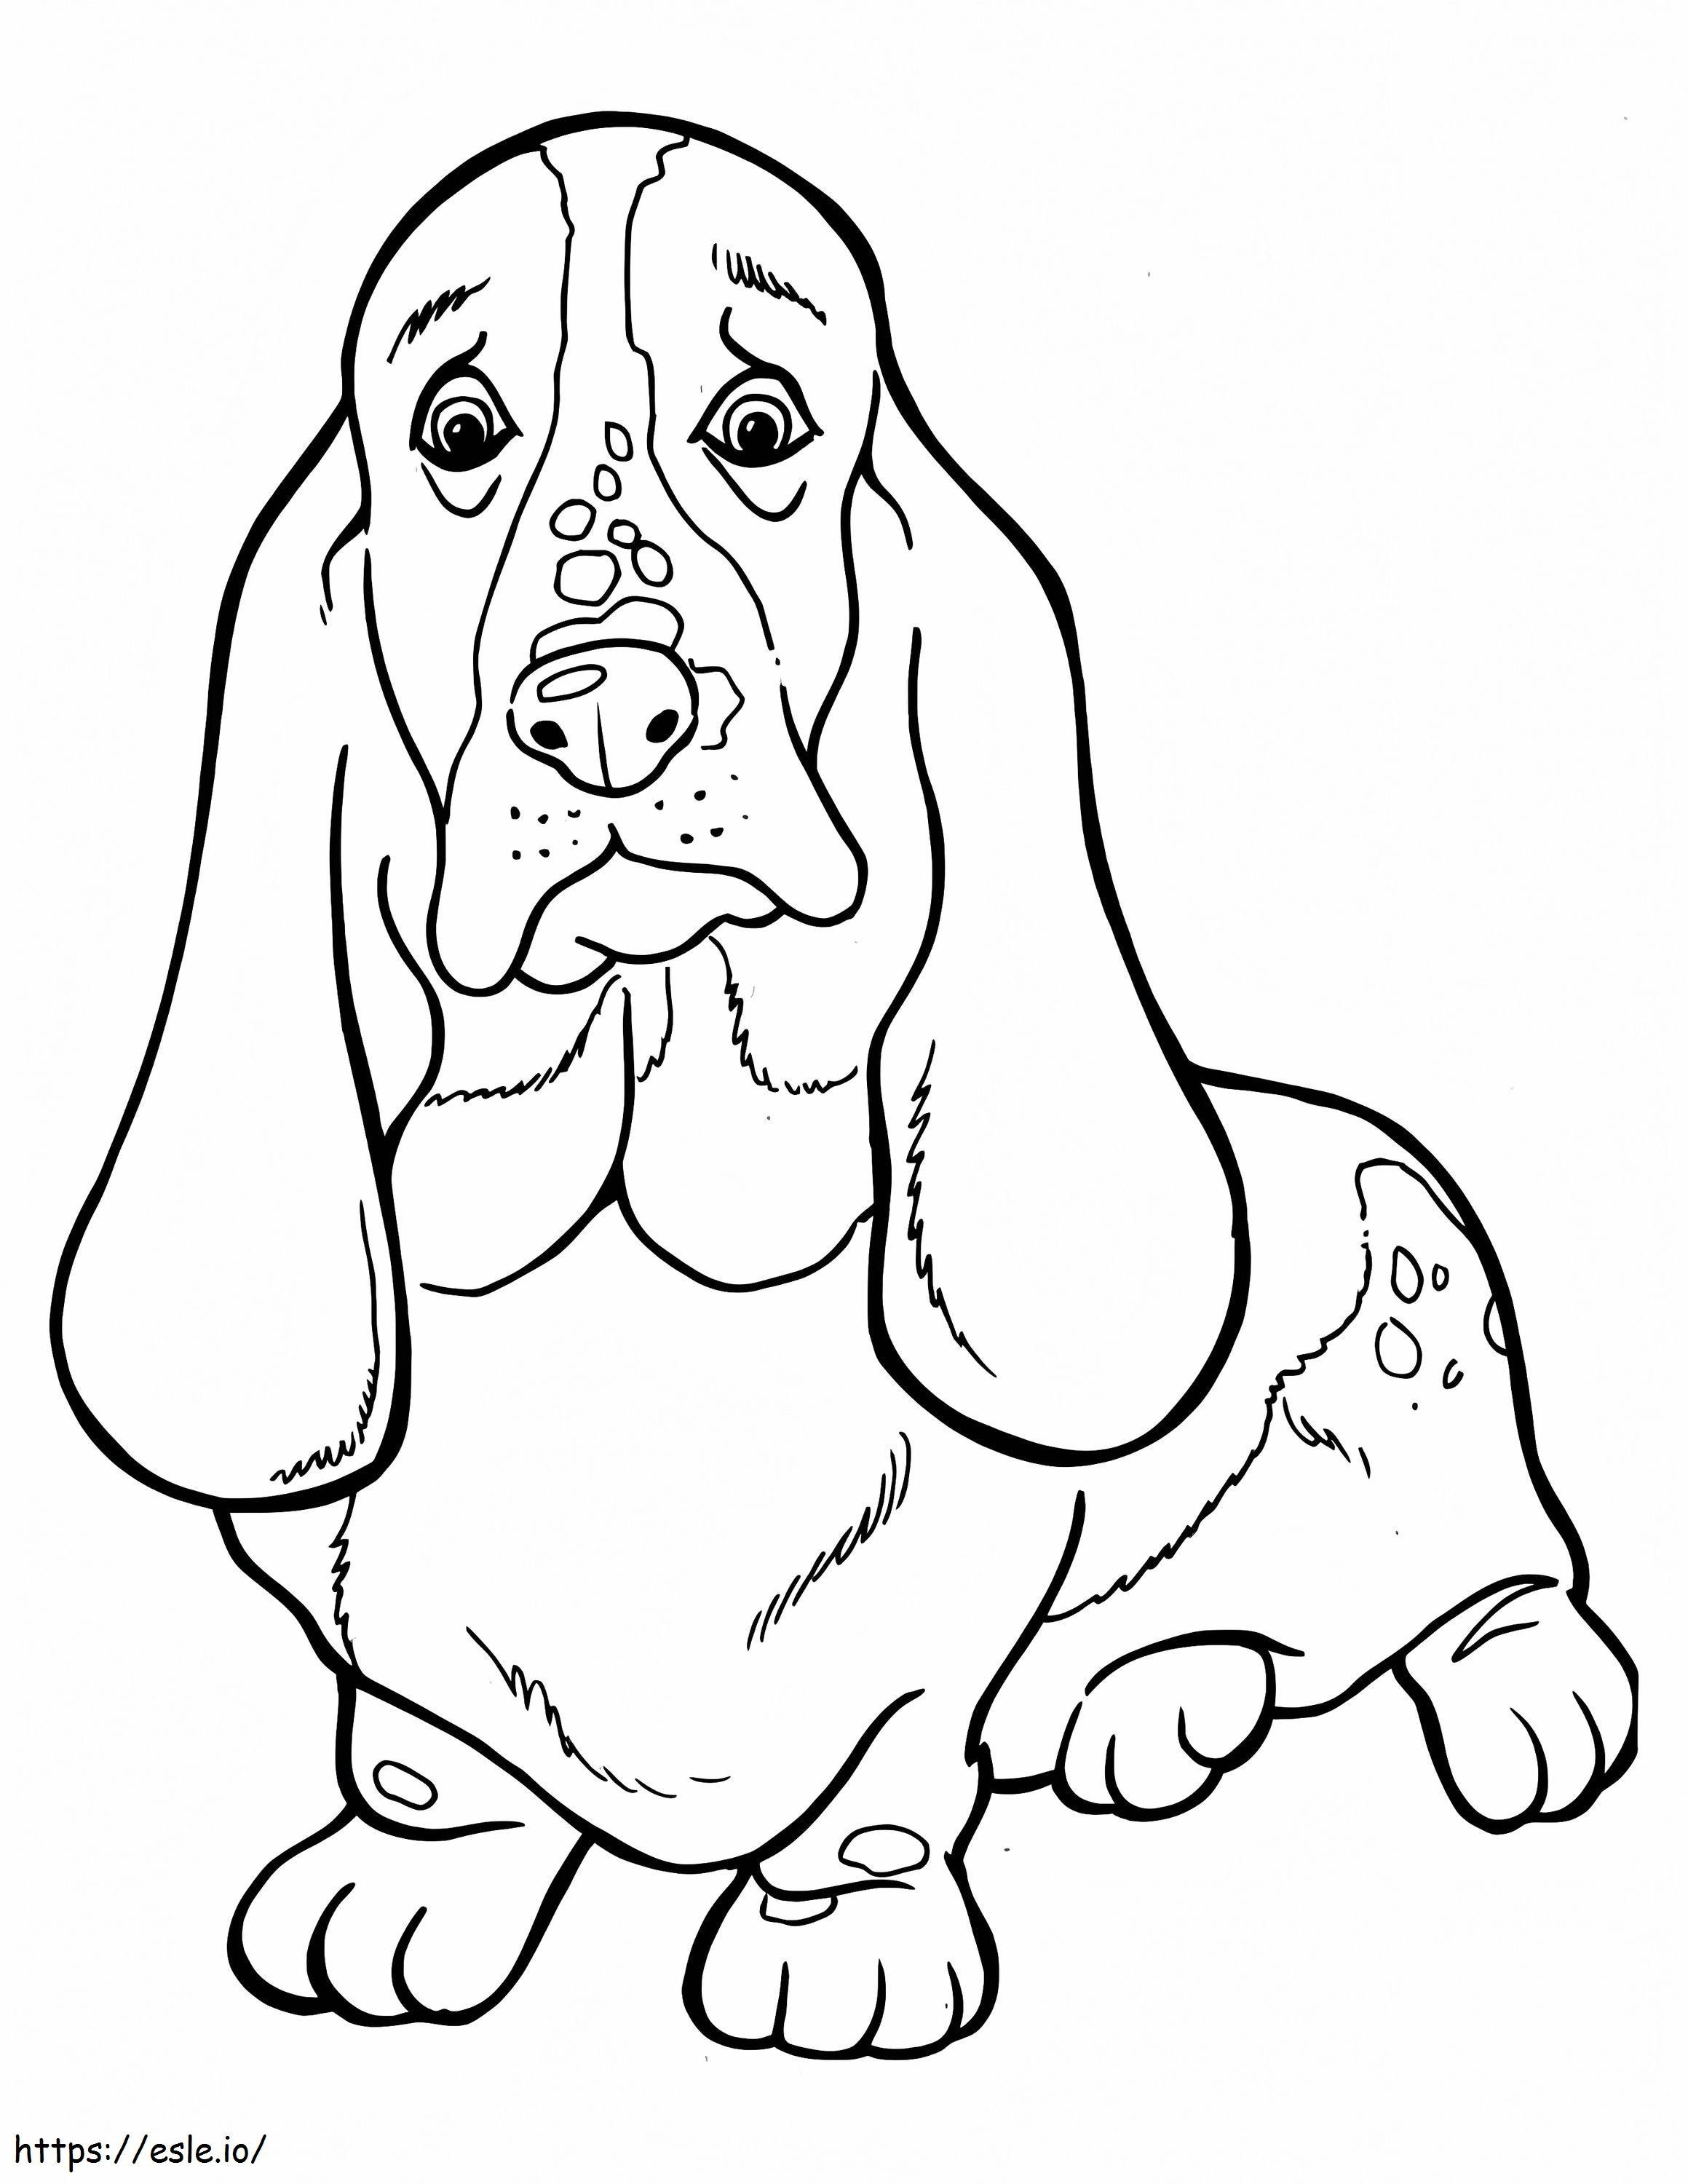 Normal Basset Hound coloring page